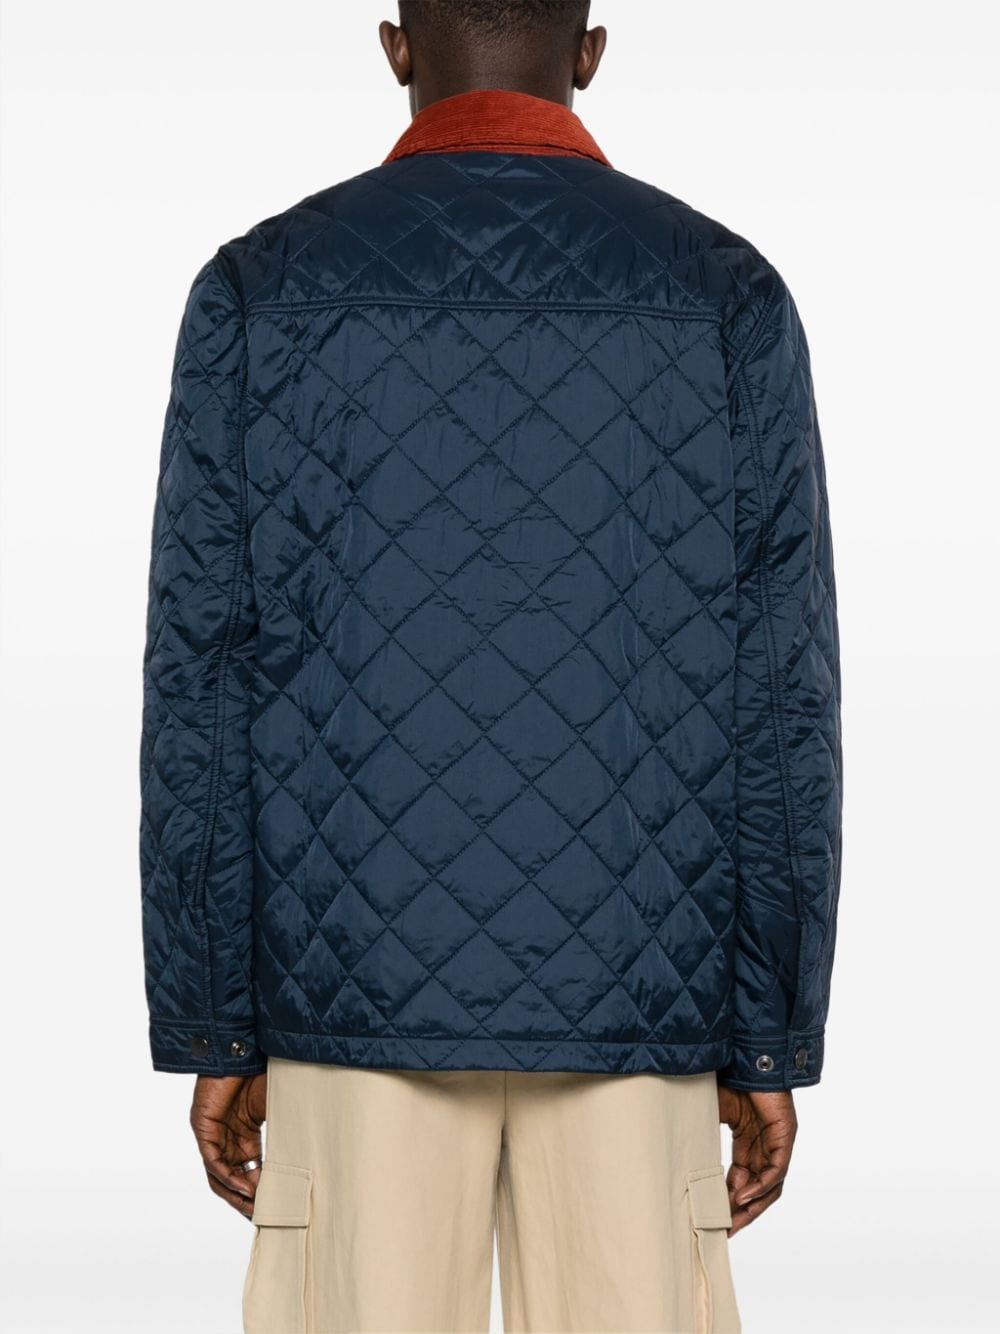 Barbour X Maison Kitsune' BARBOUR X MAISON KITSUNE'- Kenning Quilted Jacket